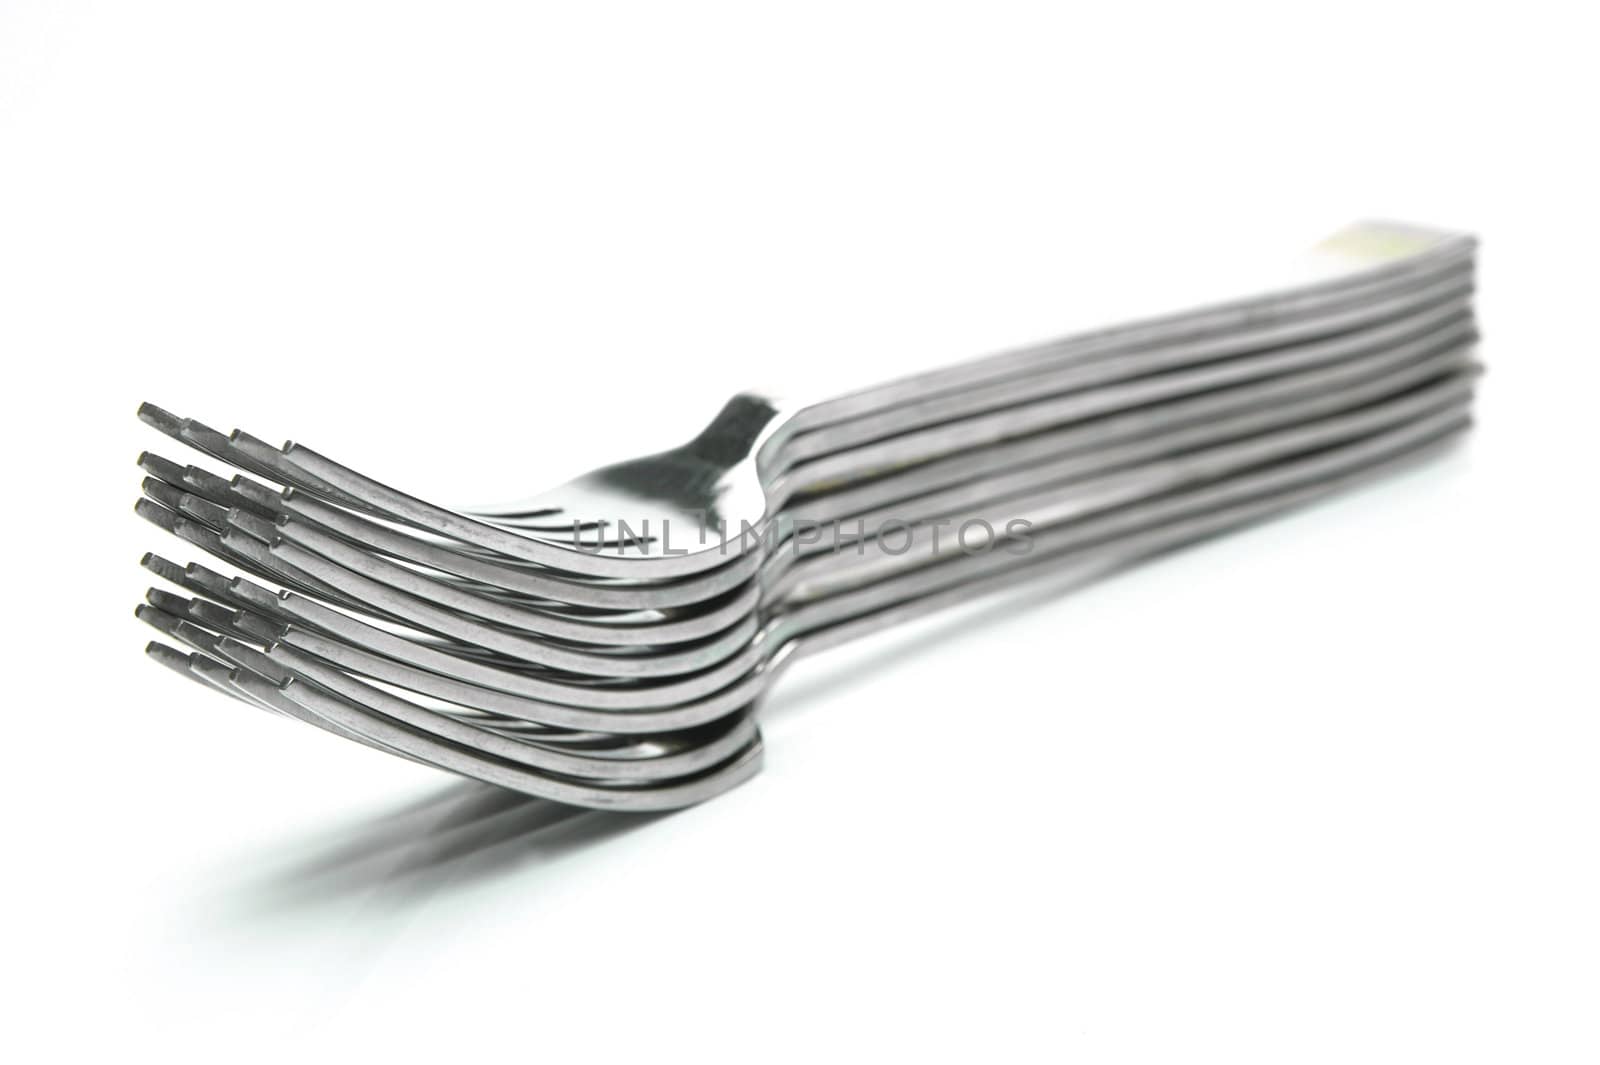 Silver table forks isolated against a white background